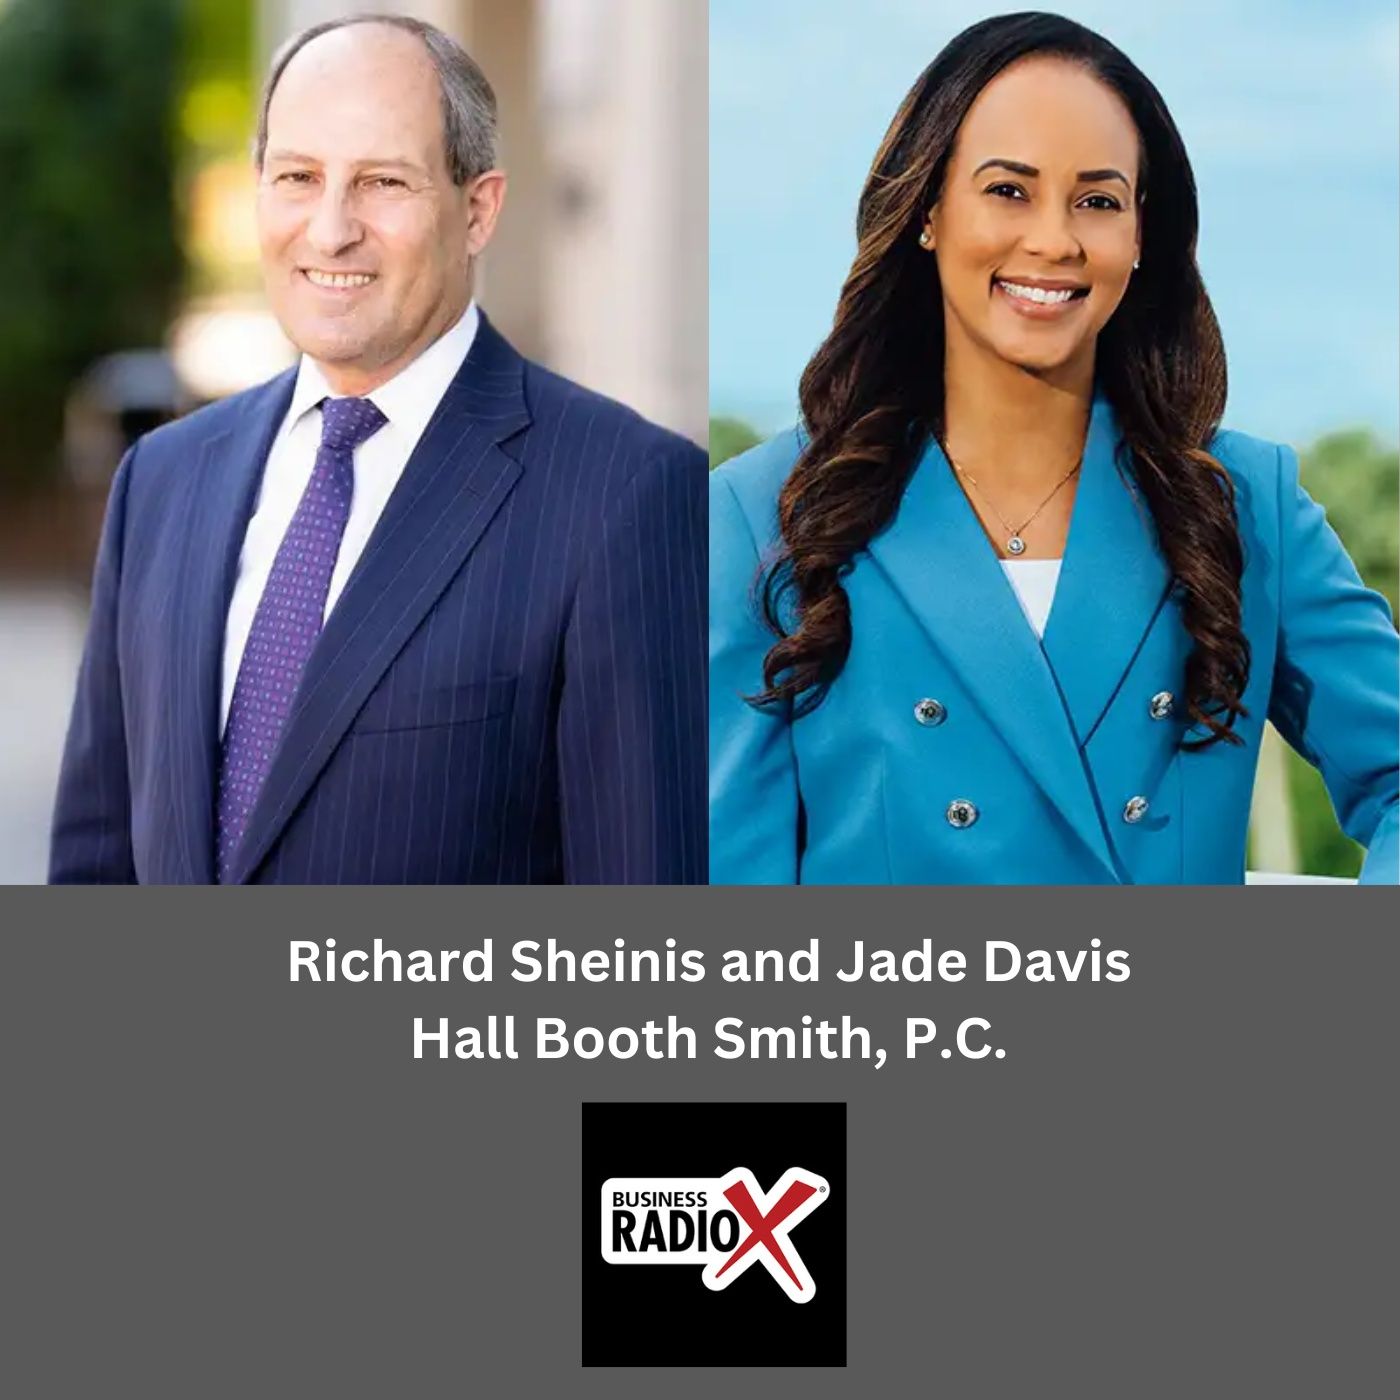 HBS Legal Trends: Legal Implications of Using AI in Your Business, with Richard Sheinis and Jade Davis, Hall Booth Smith, P.C.